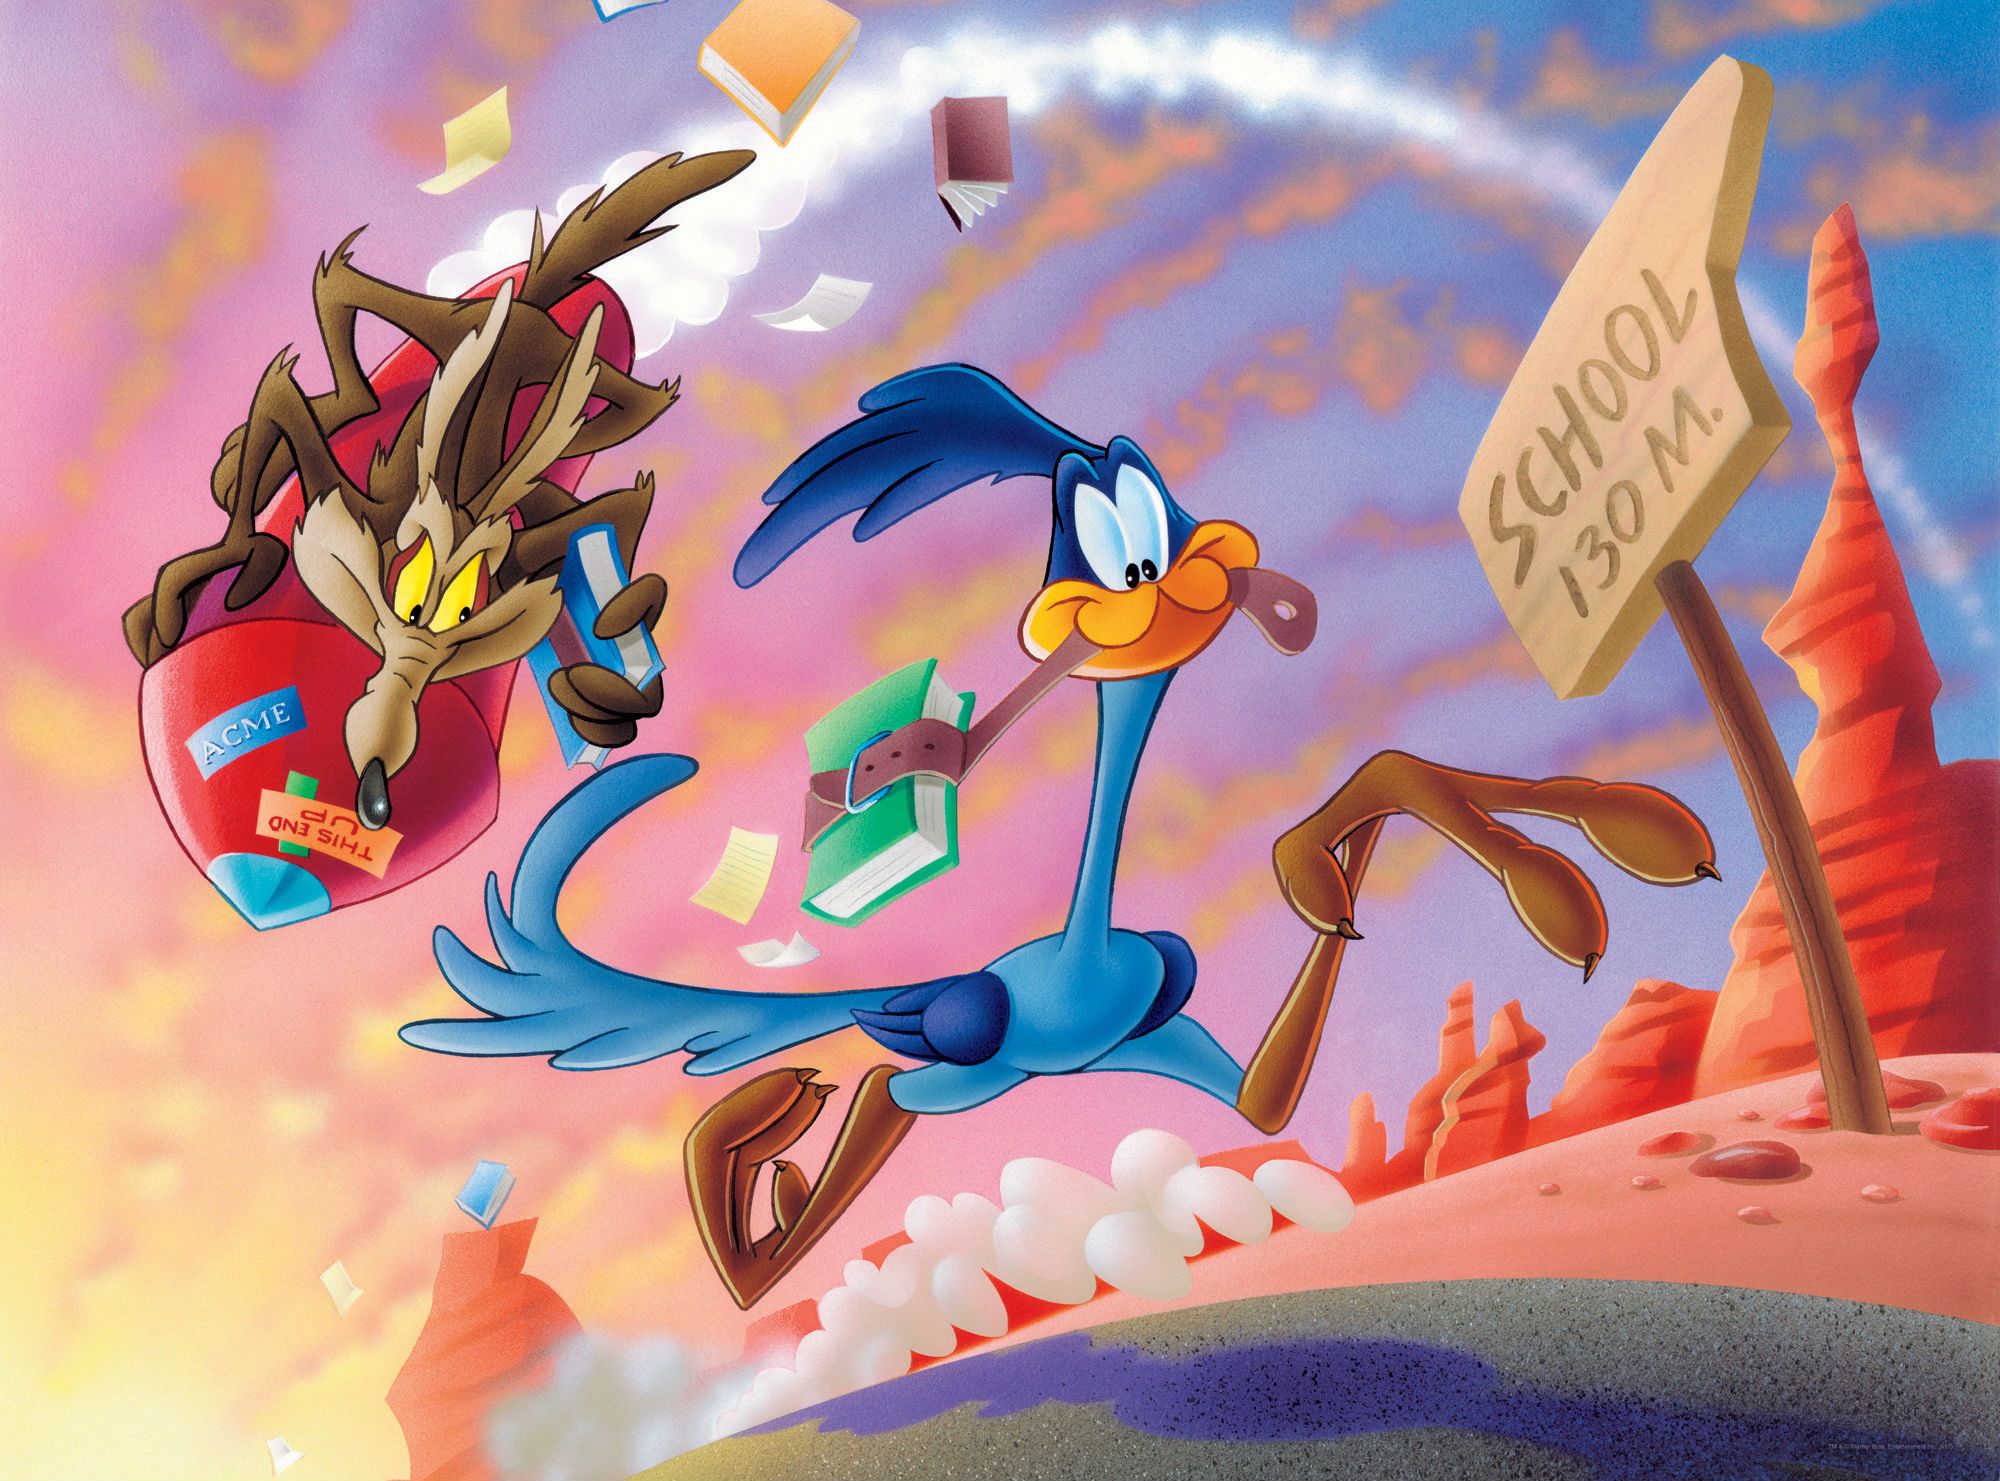 WILE E COYOTE ROAD RUNNER looney fw wallpaper 1680x1050 161121